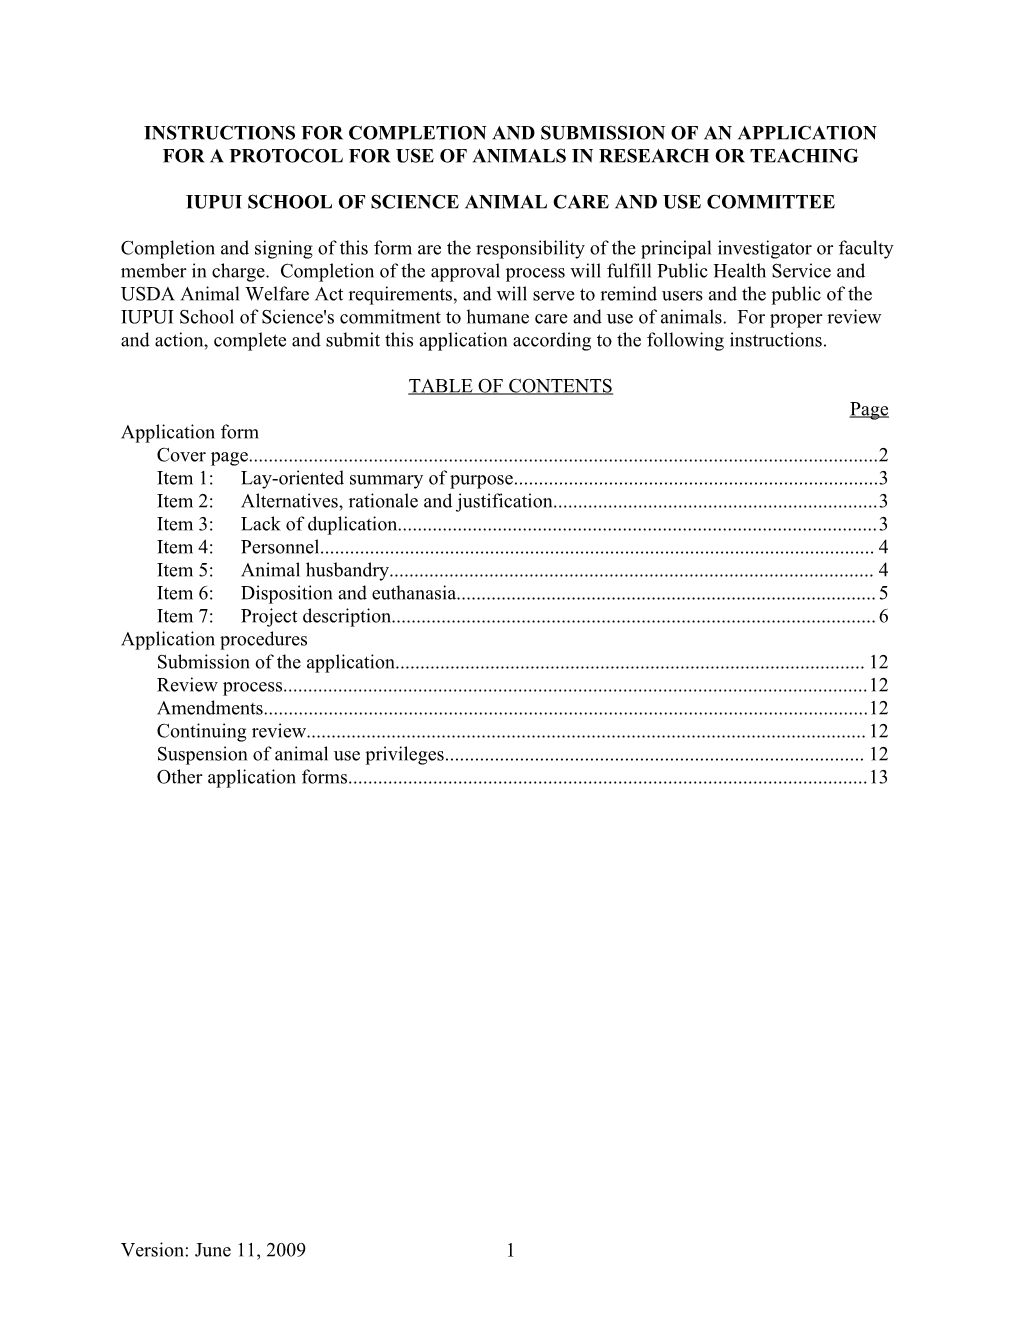 Instructions for Completion and Submission of an Application for Animal Use in Research